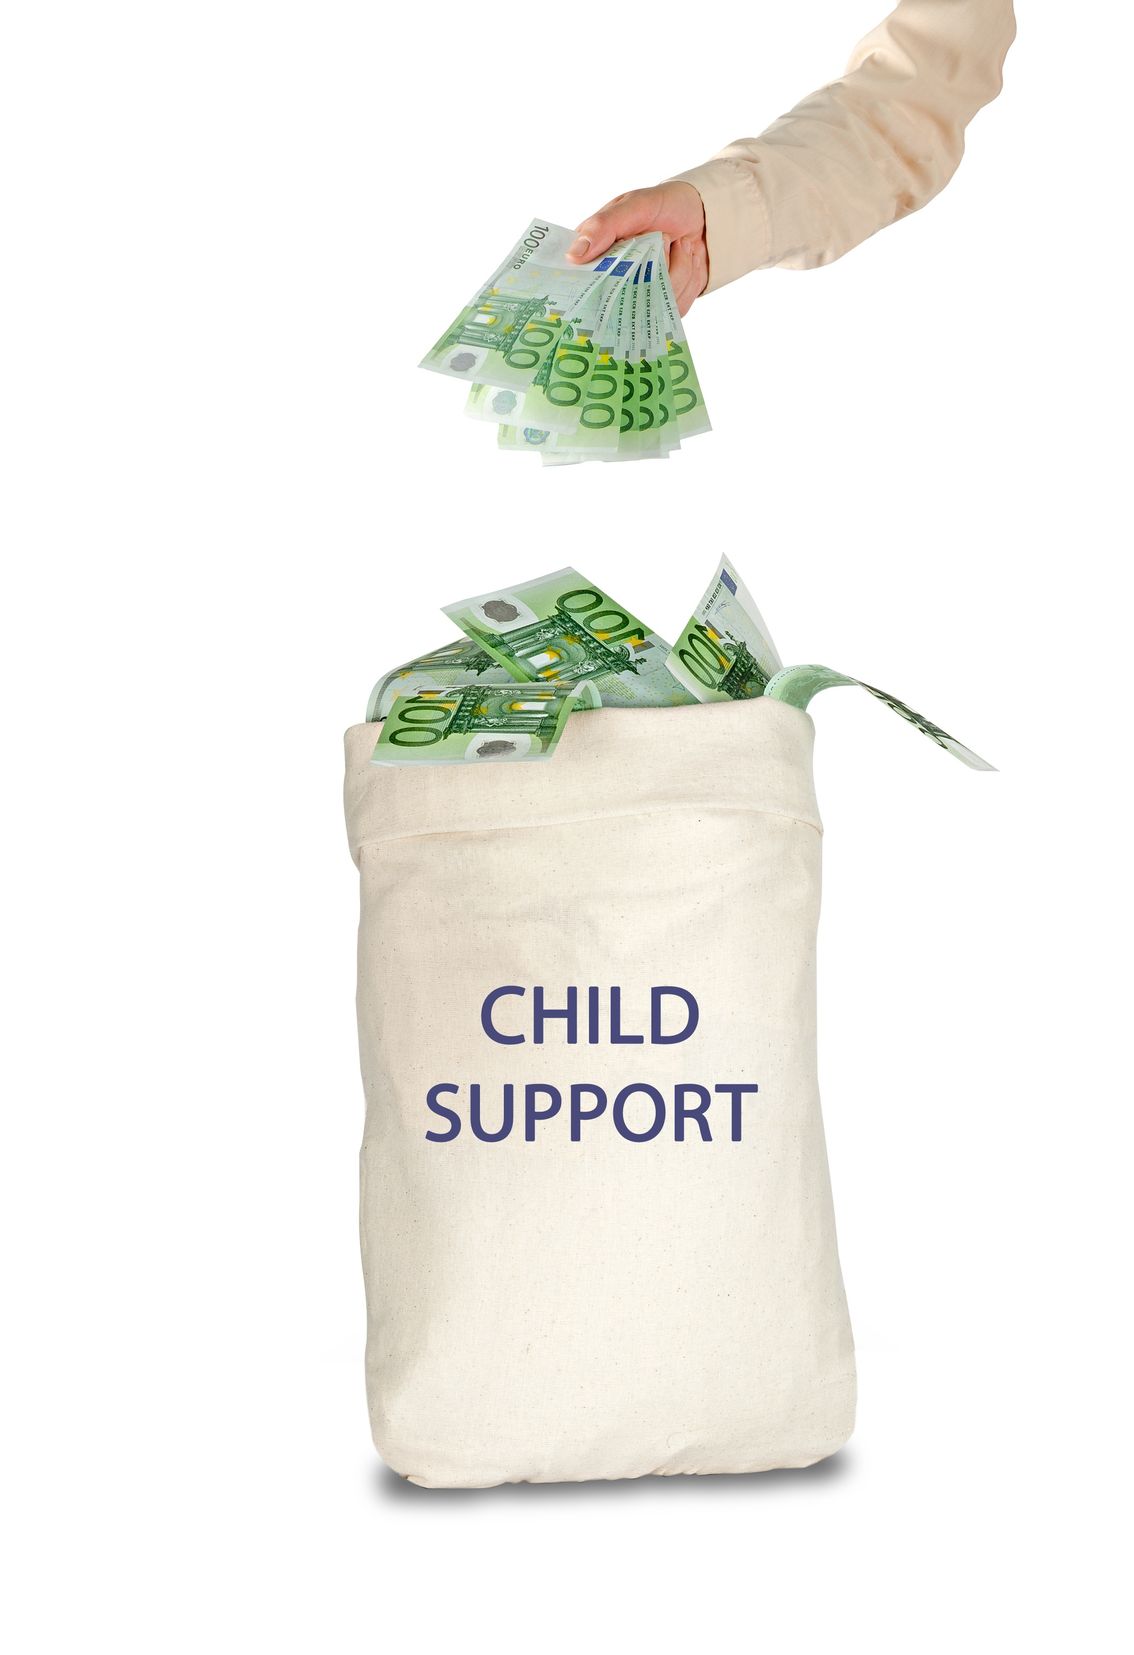 Does An Unemployed Parent Have To Pay Child Support